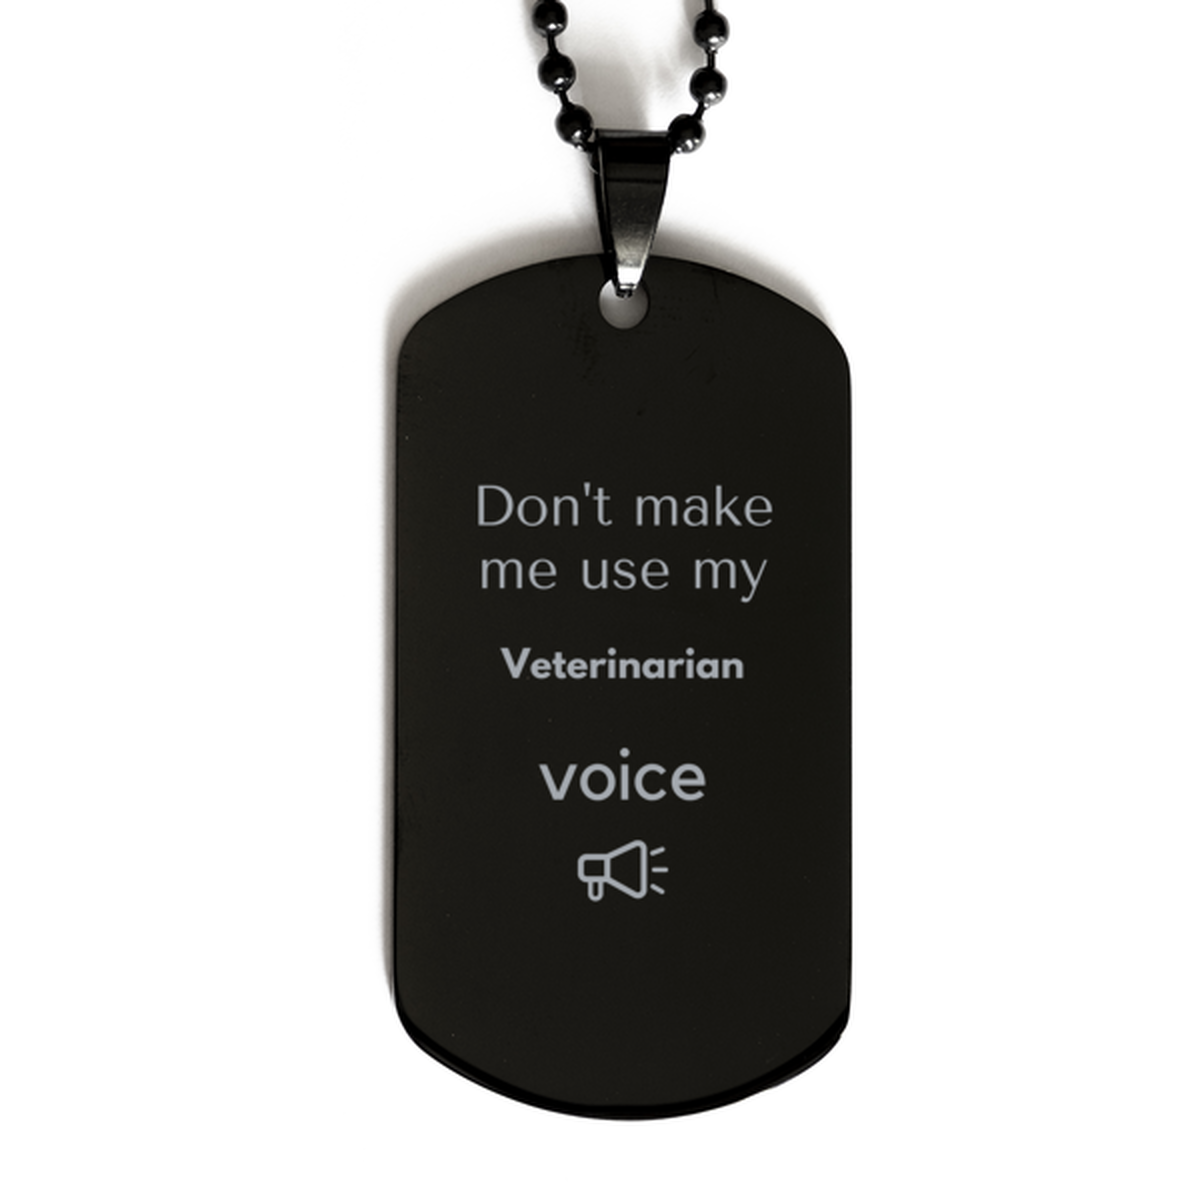 Don't make me use my Veterinarian voice, Sarcasm Veterinarian Gifts, Christmas Veterinarian Black Dog Tag Birthday Unique Gifts For Veterinarian Coworkers, Men, Women, Colleague, Friends